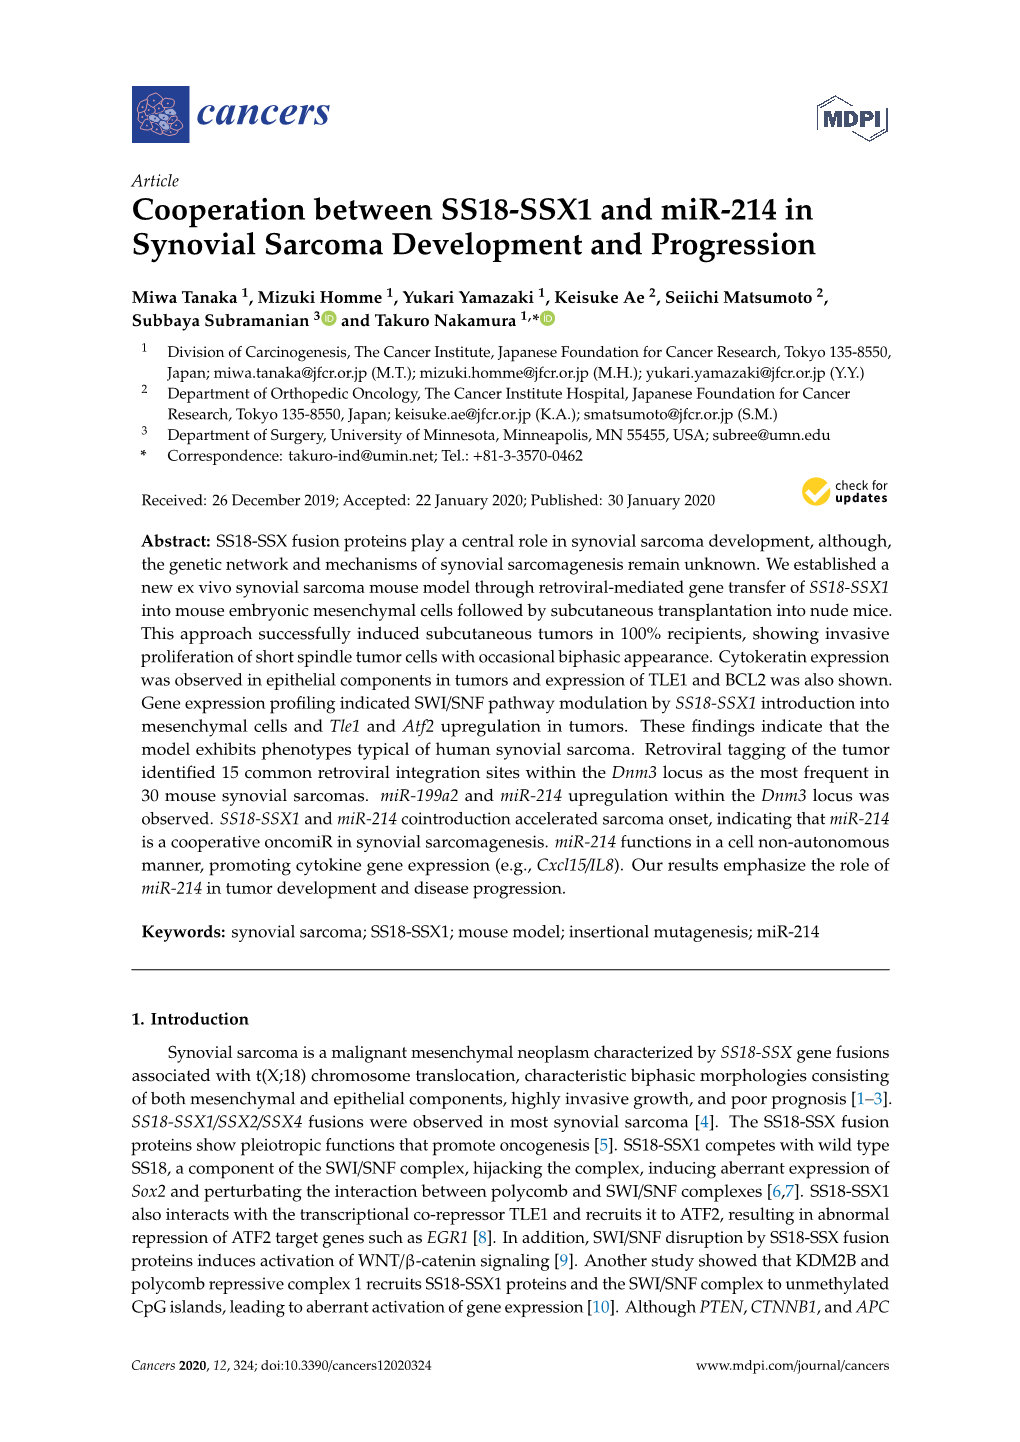 Cooperation Between SS18-SSX1 and Mir-214 in Synovial Sarcoma Development and Progression